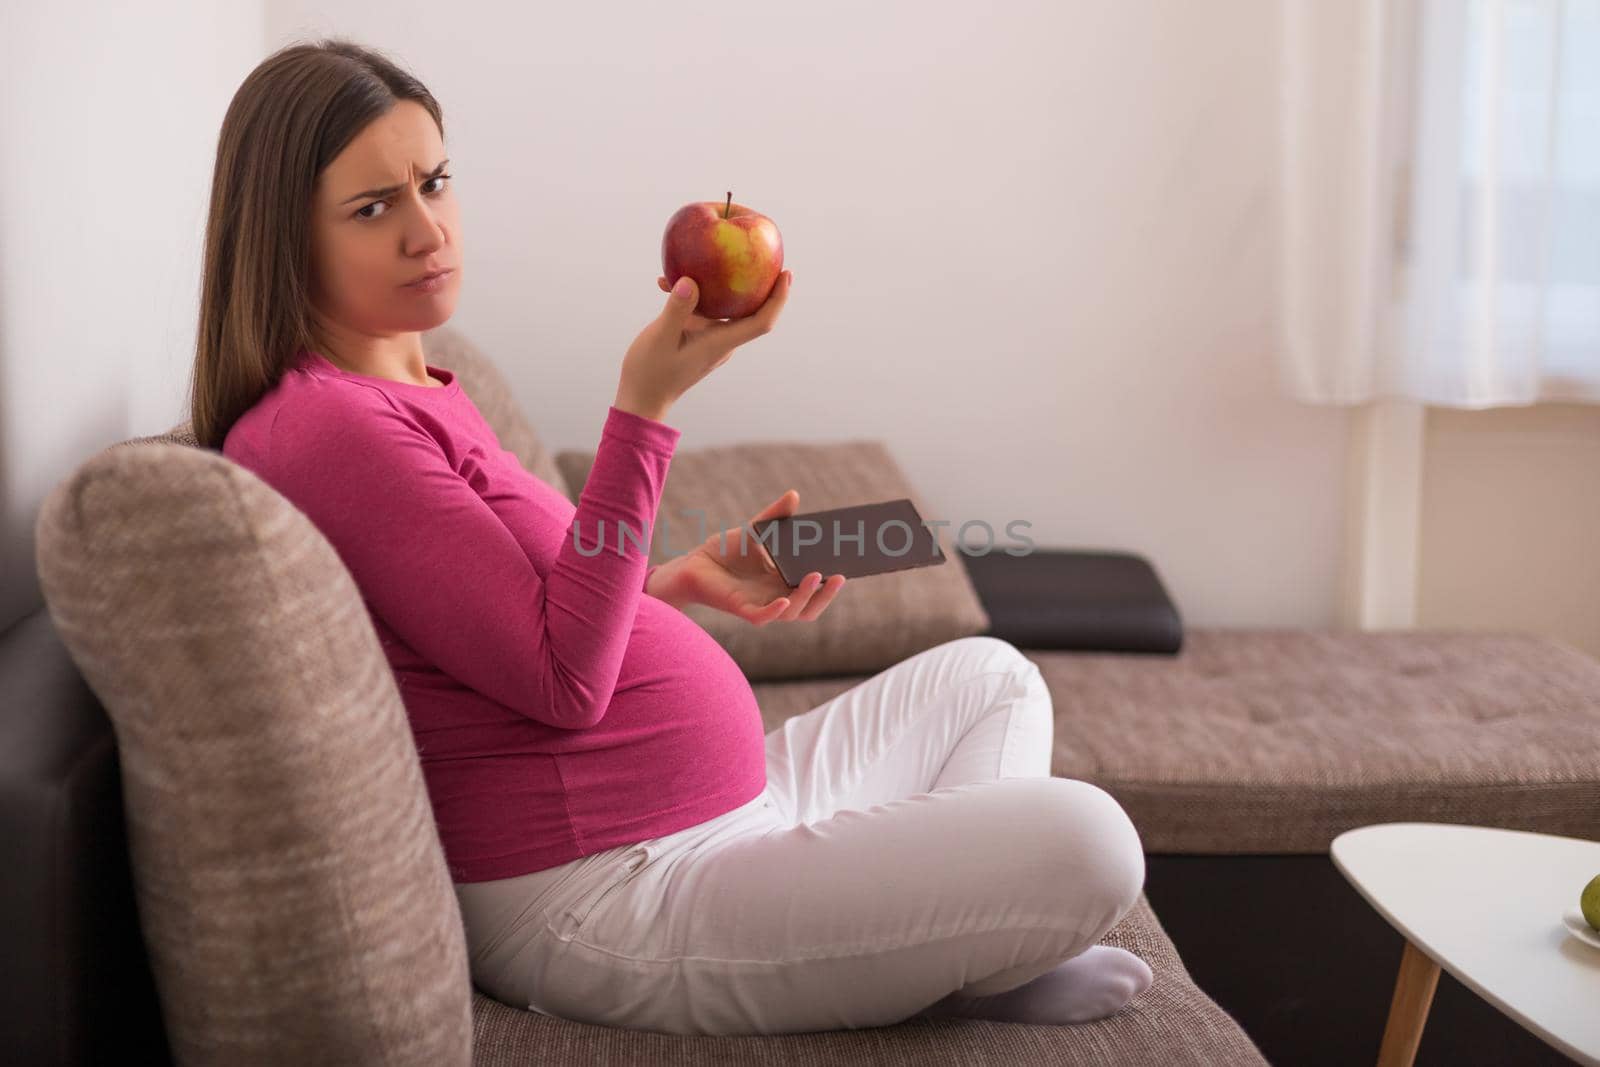 Angry pregnant woman doesn't want to eat fruit.